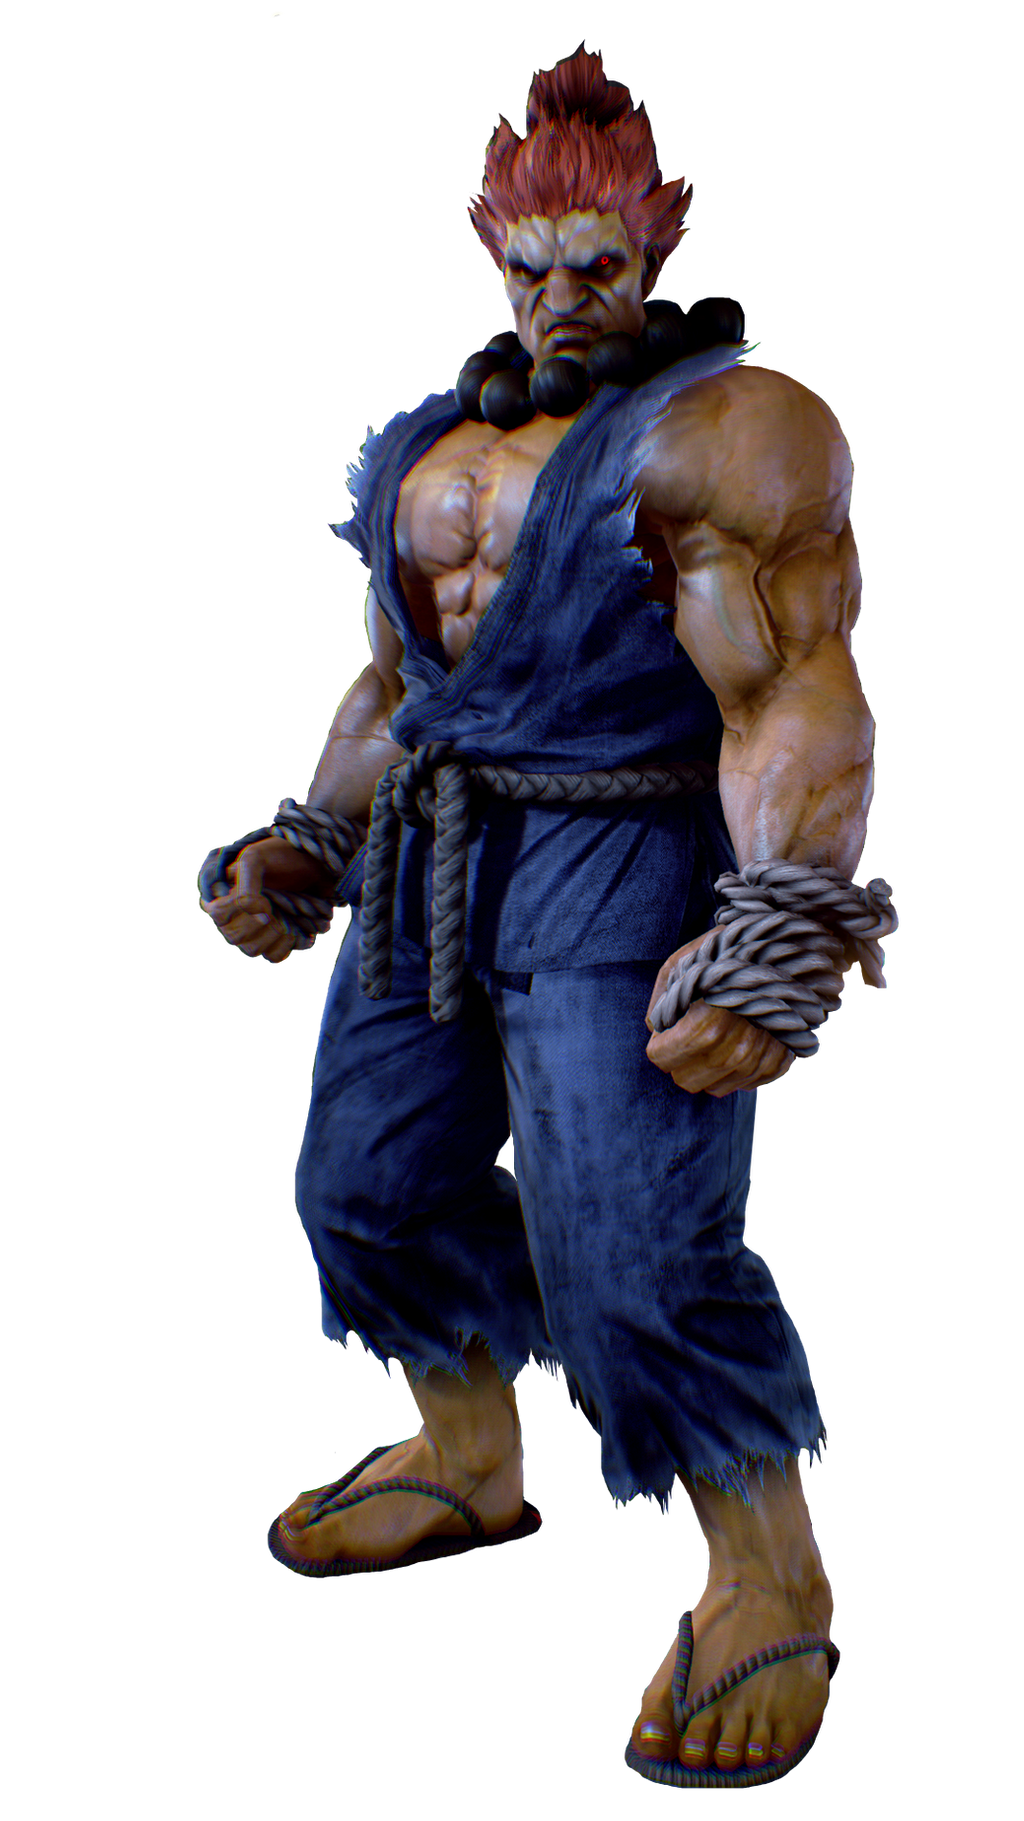 Akuma Likely the Only Street Fighter Character Coming to Tekken 7